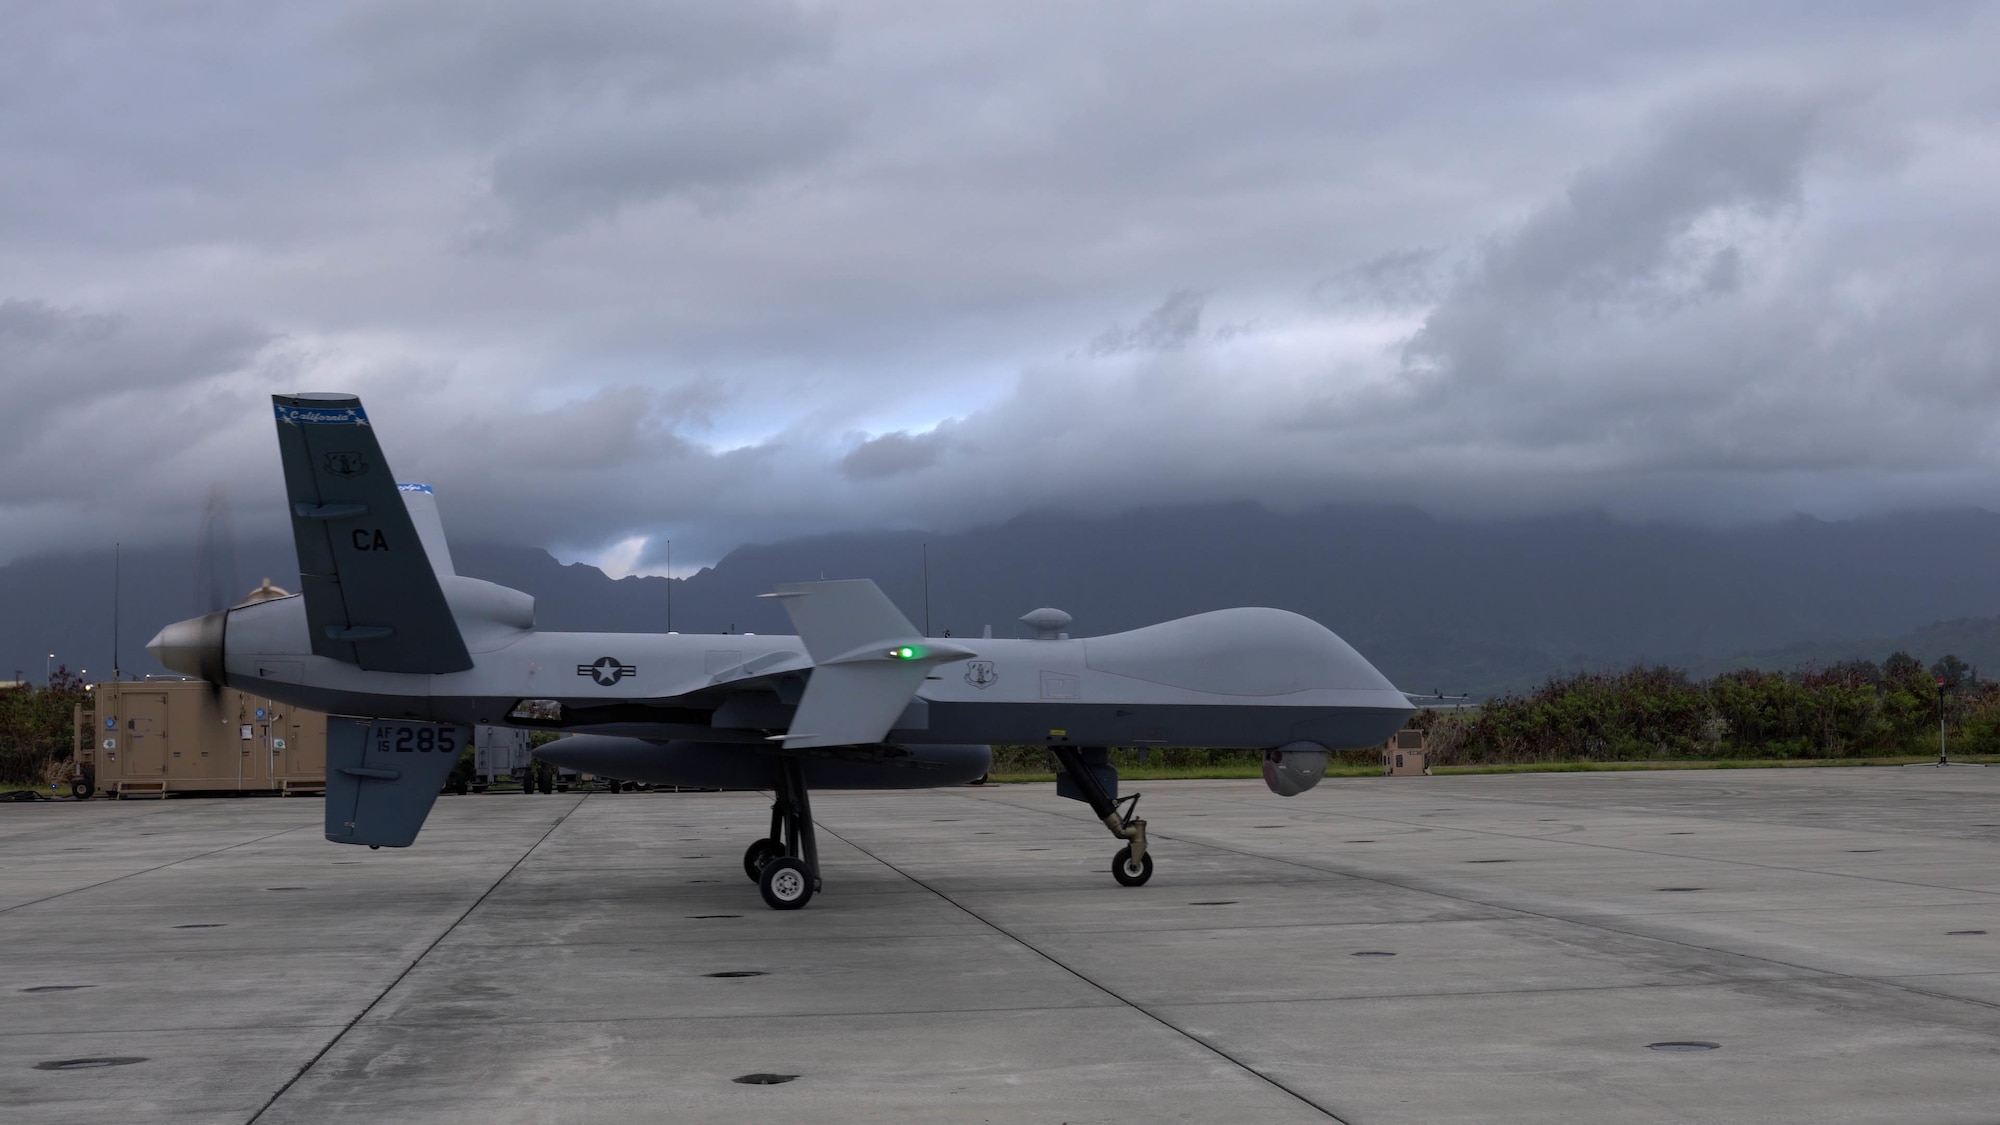 An MQ-9A Reaper sits on a runway during Rim of the Pacific (RIMPAC) 2022 at Marine Corps Air Base Hawaii, Hawaii , July 21, 2022. The remotely piloted aircraft, assigned to the 163rd Attack Wing, responded to the scene of a ship fire during a training exercise in the world's largest international maritime exercise. (U.S. Air Force photo by Airman 1st Class Ariel O'Shea)